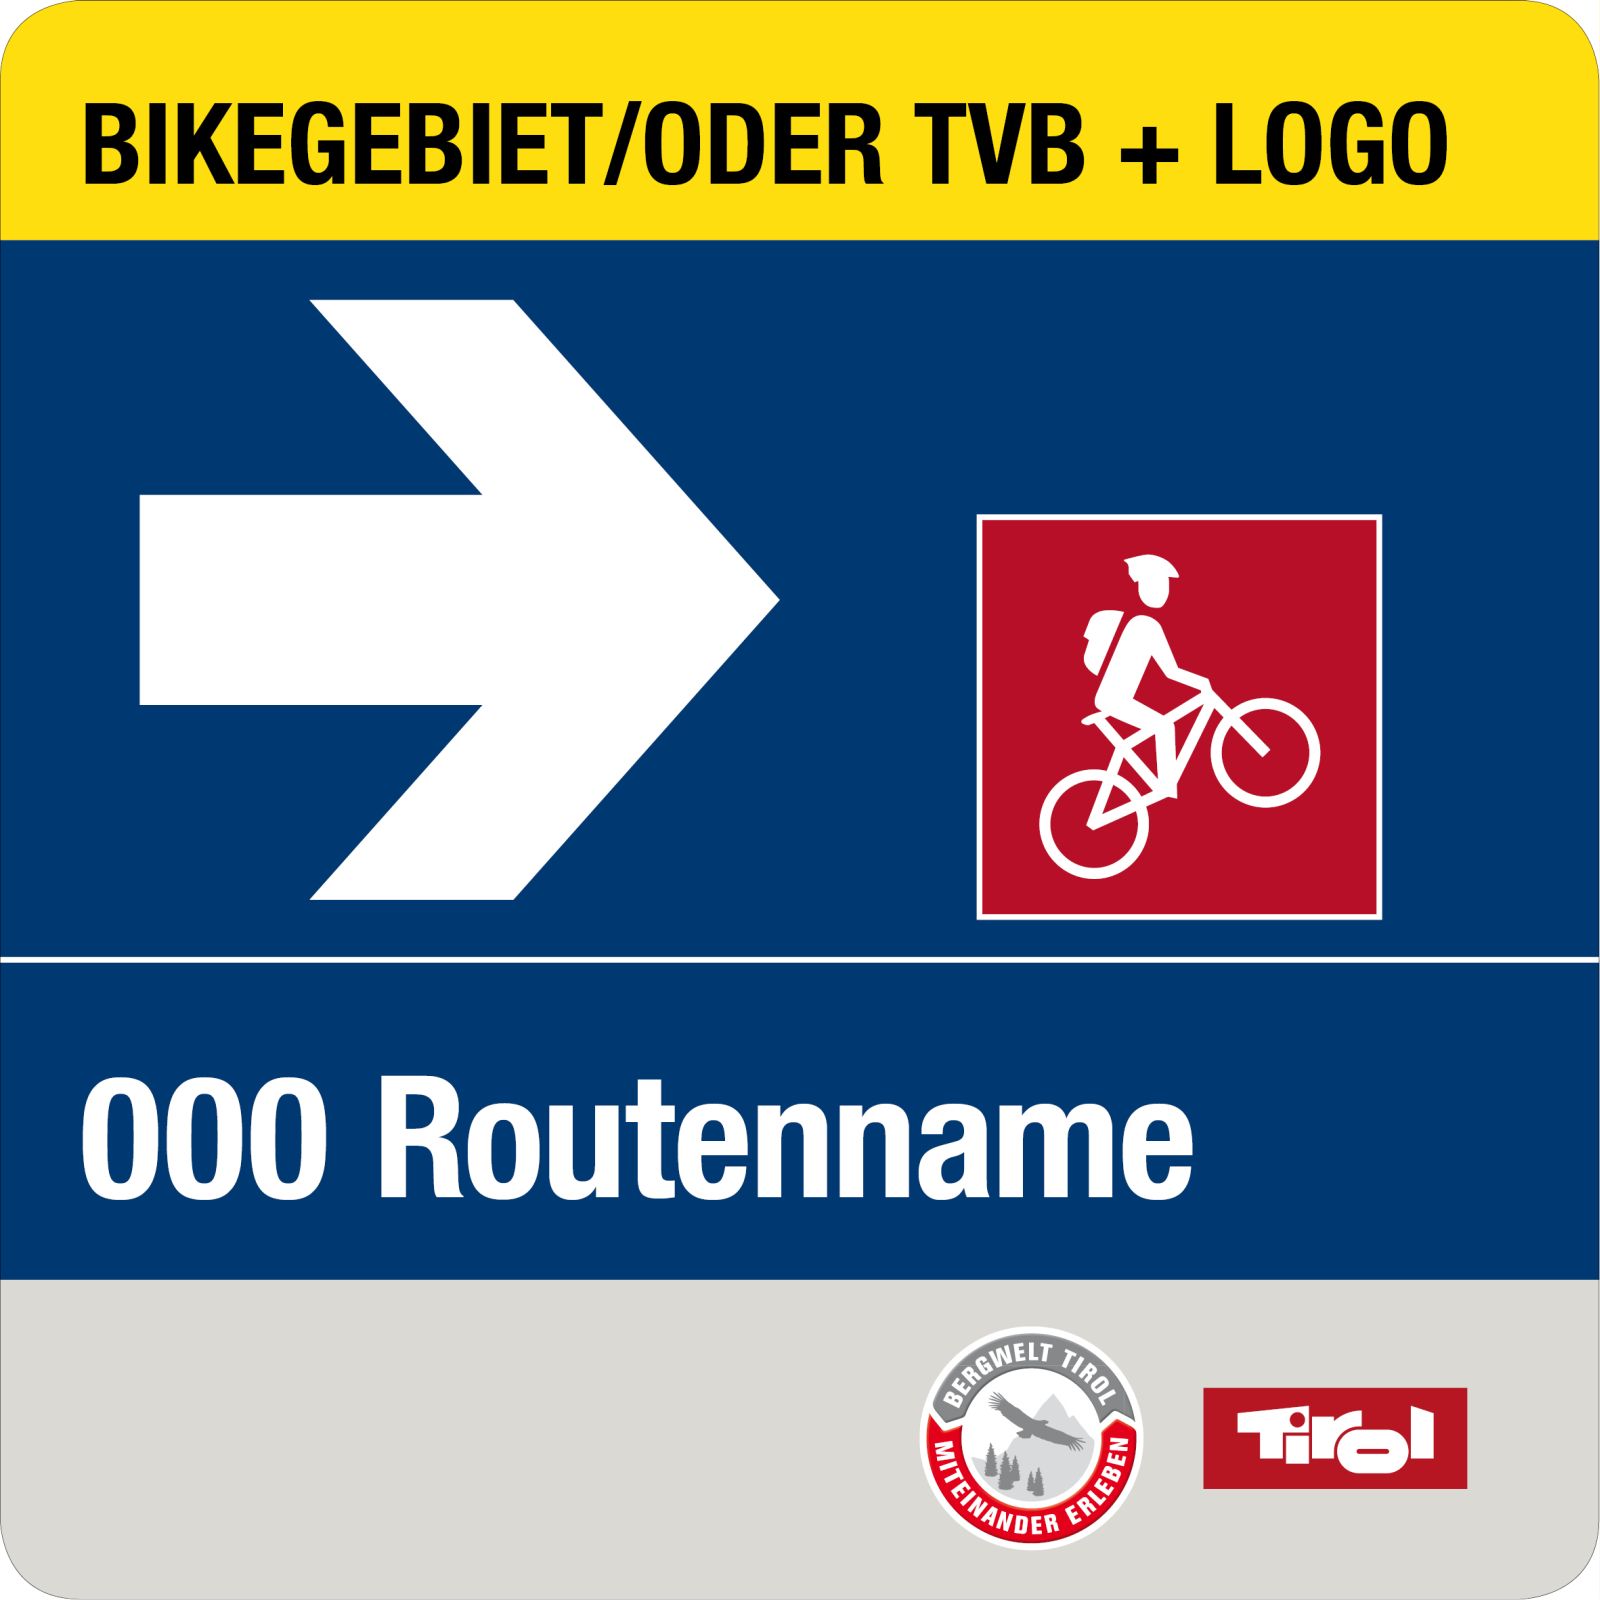 Mountain bike route directional sign with difficulty "medium".